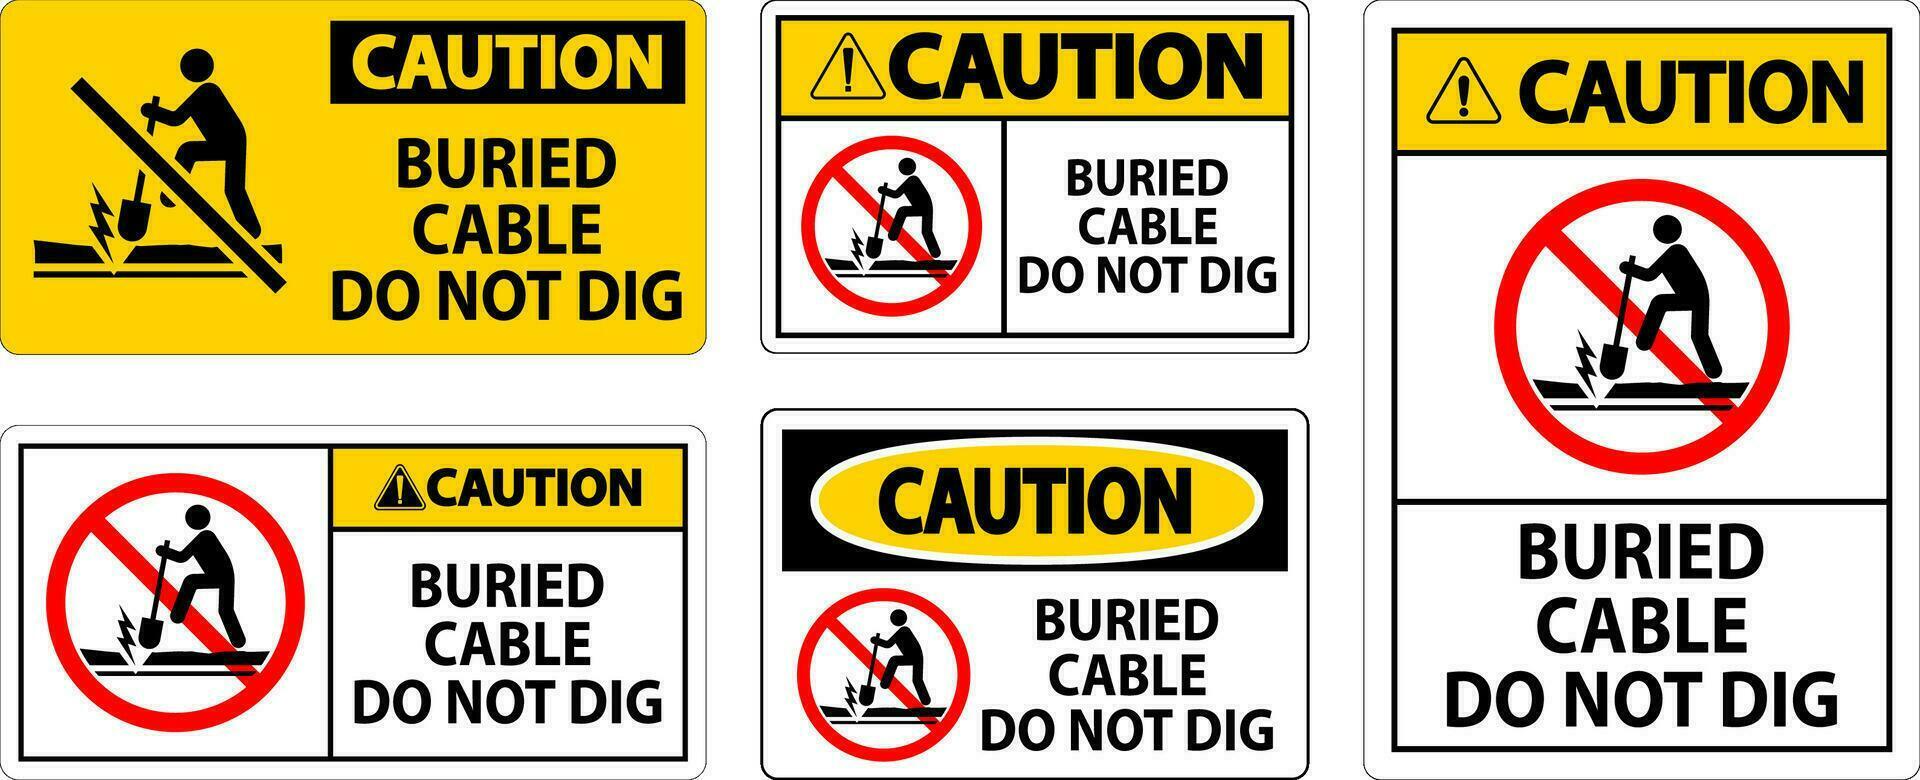 Caution Sign Buried Cable, Do Not Dig On White Background vector